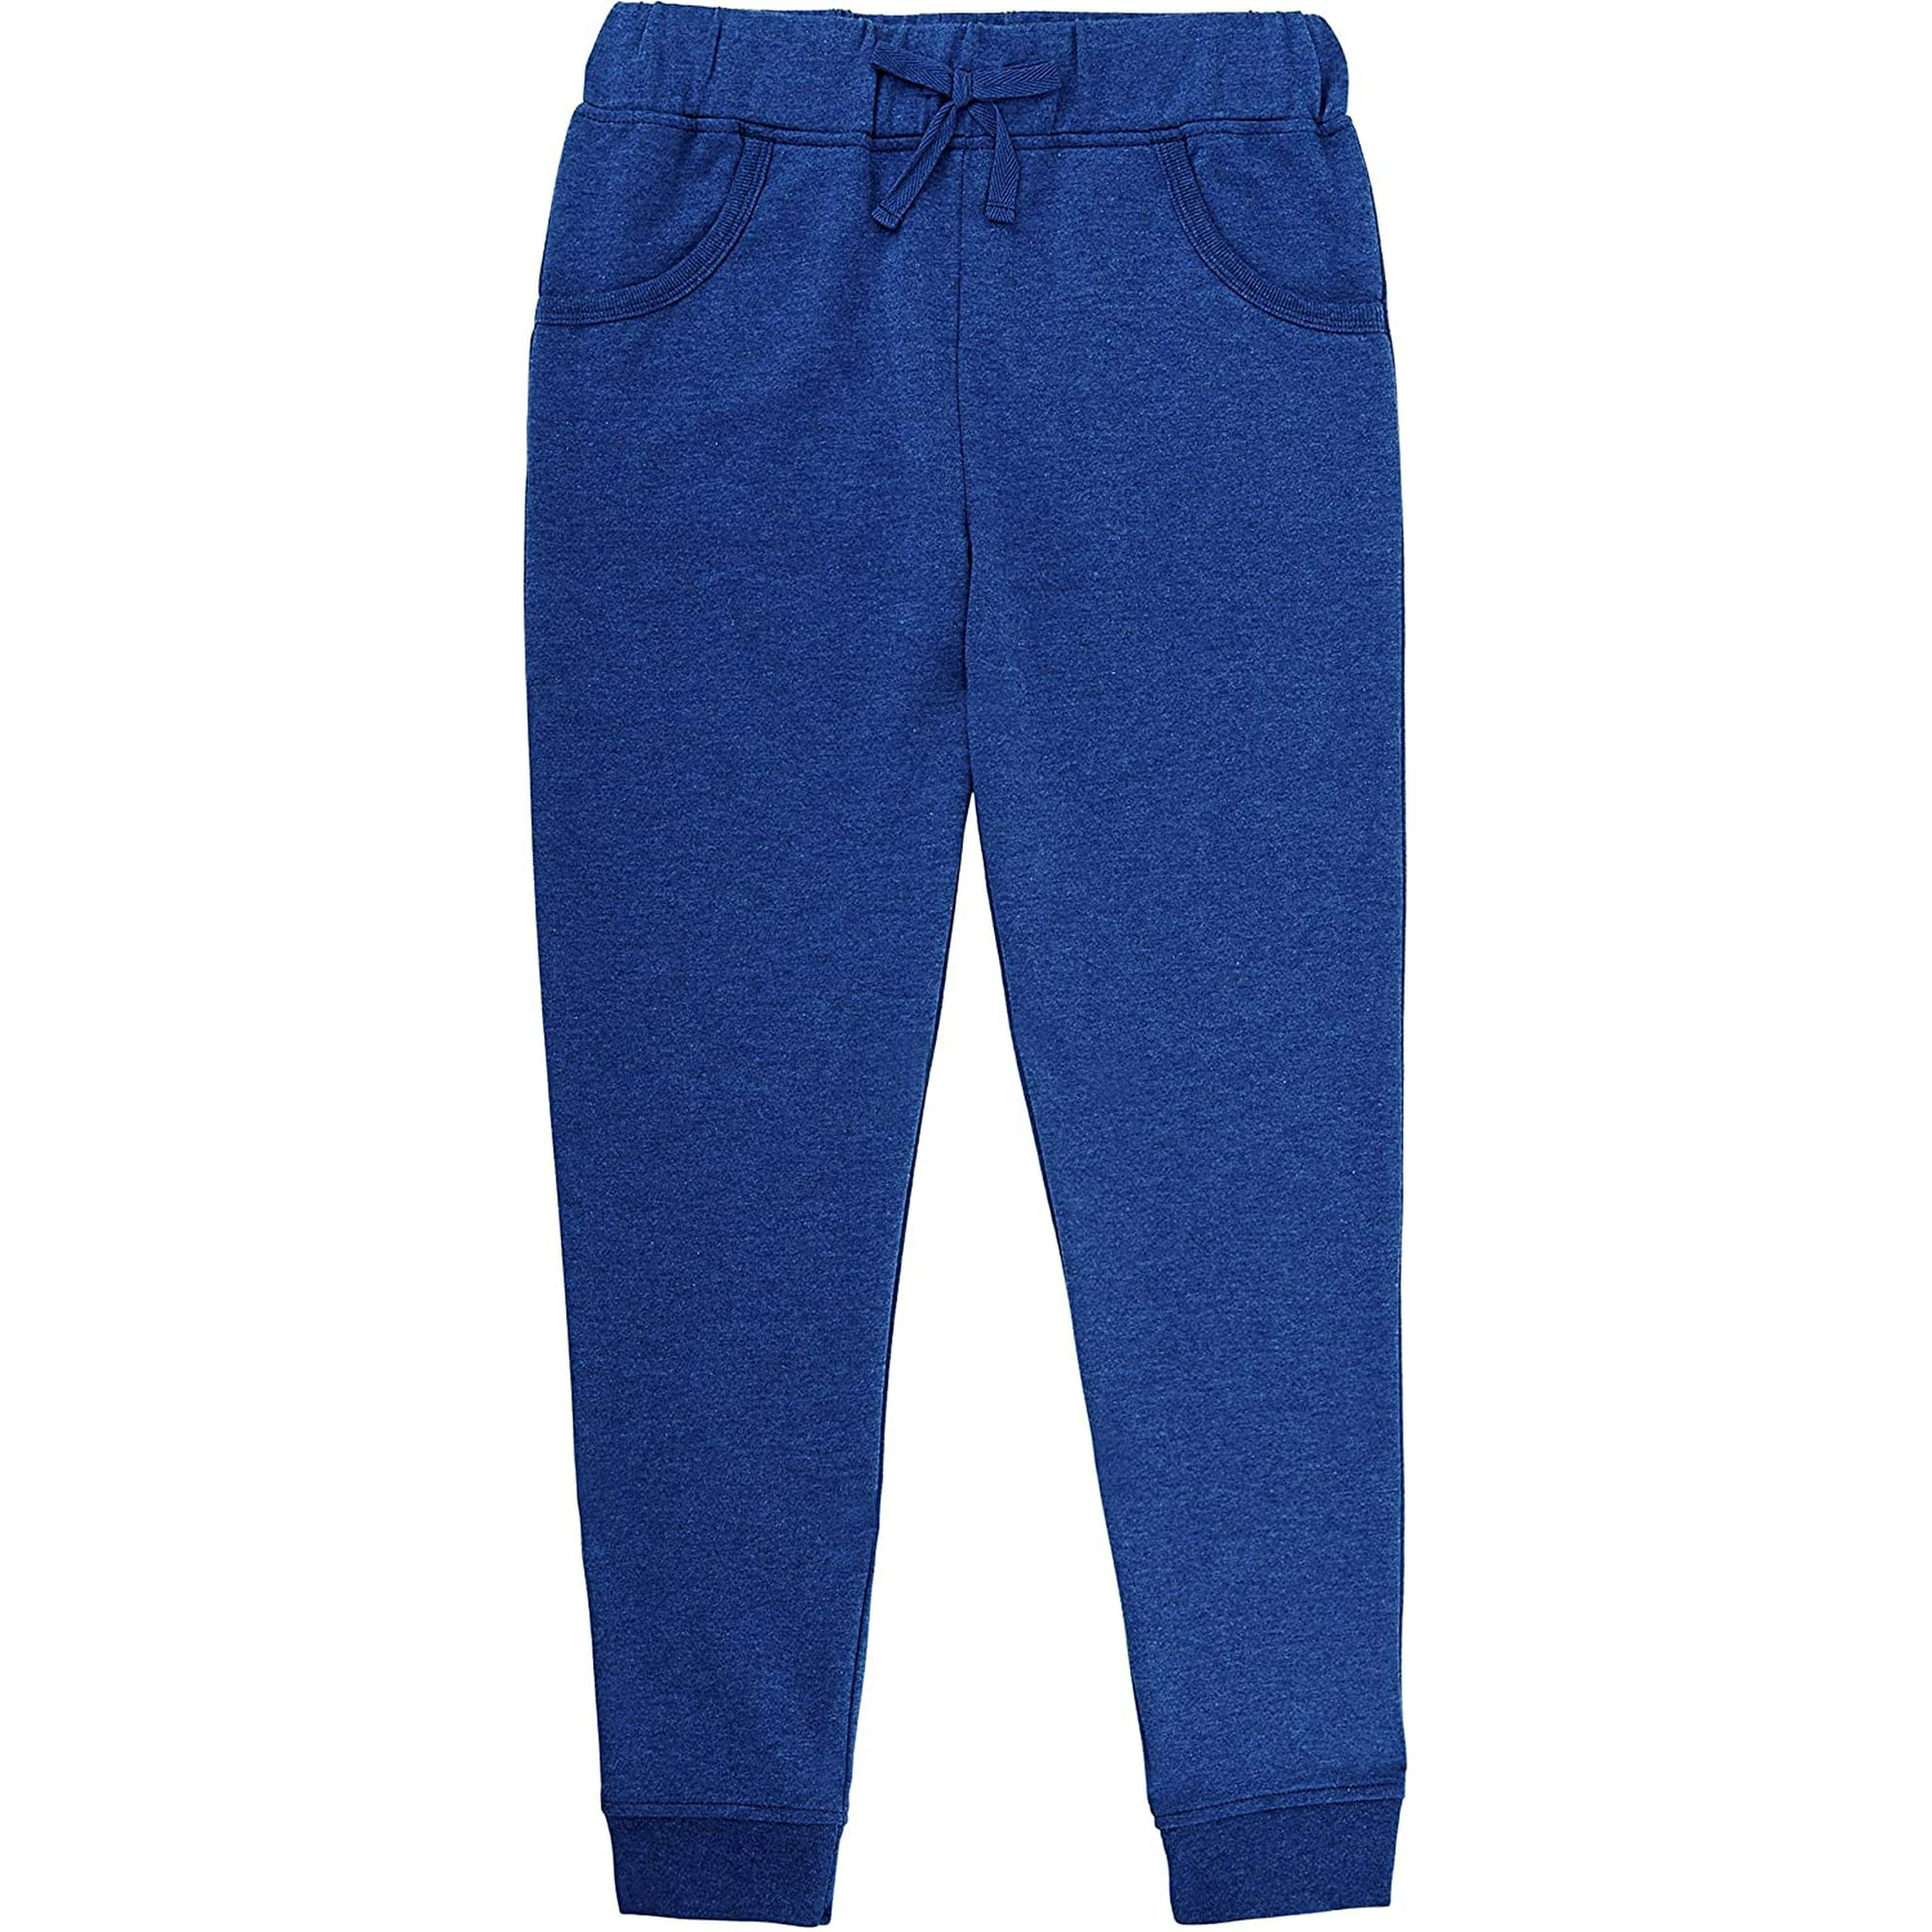 French Toast School Uniform Girls French Terry Jogger Pants